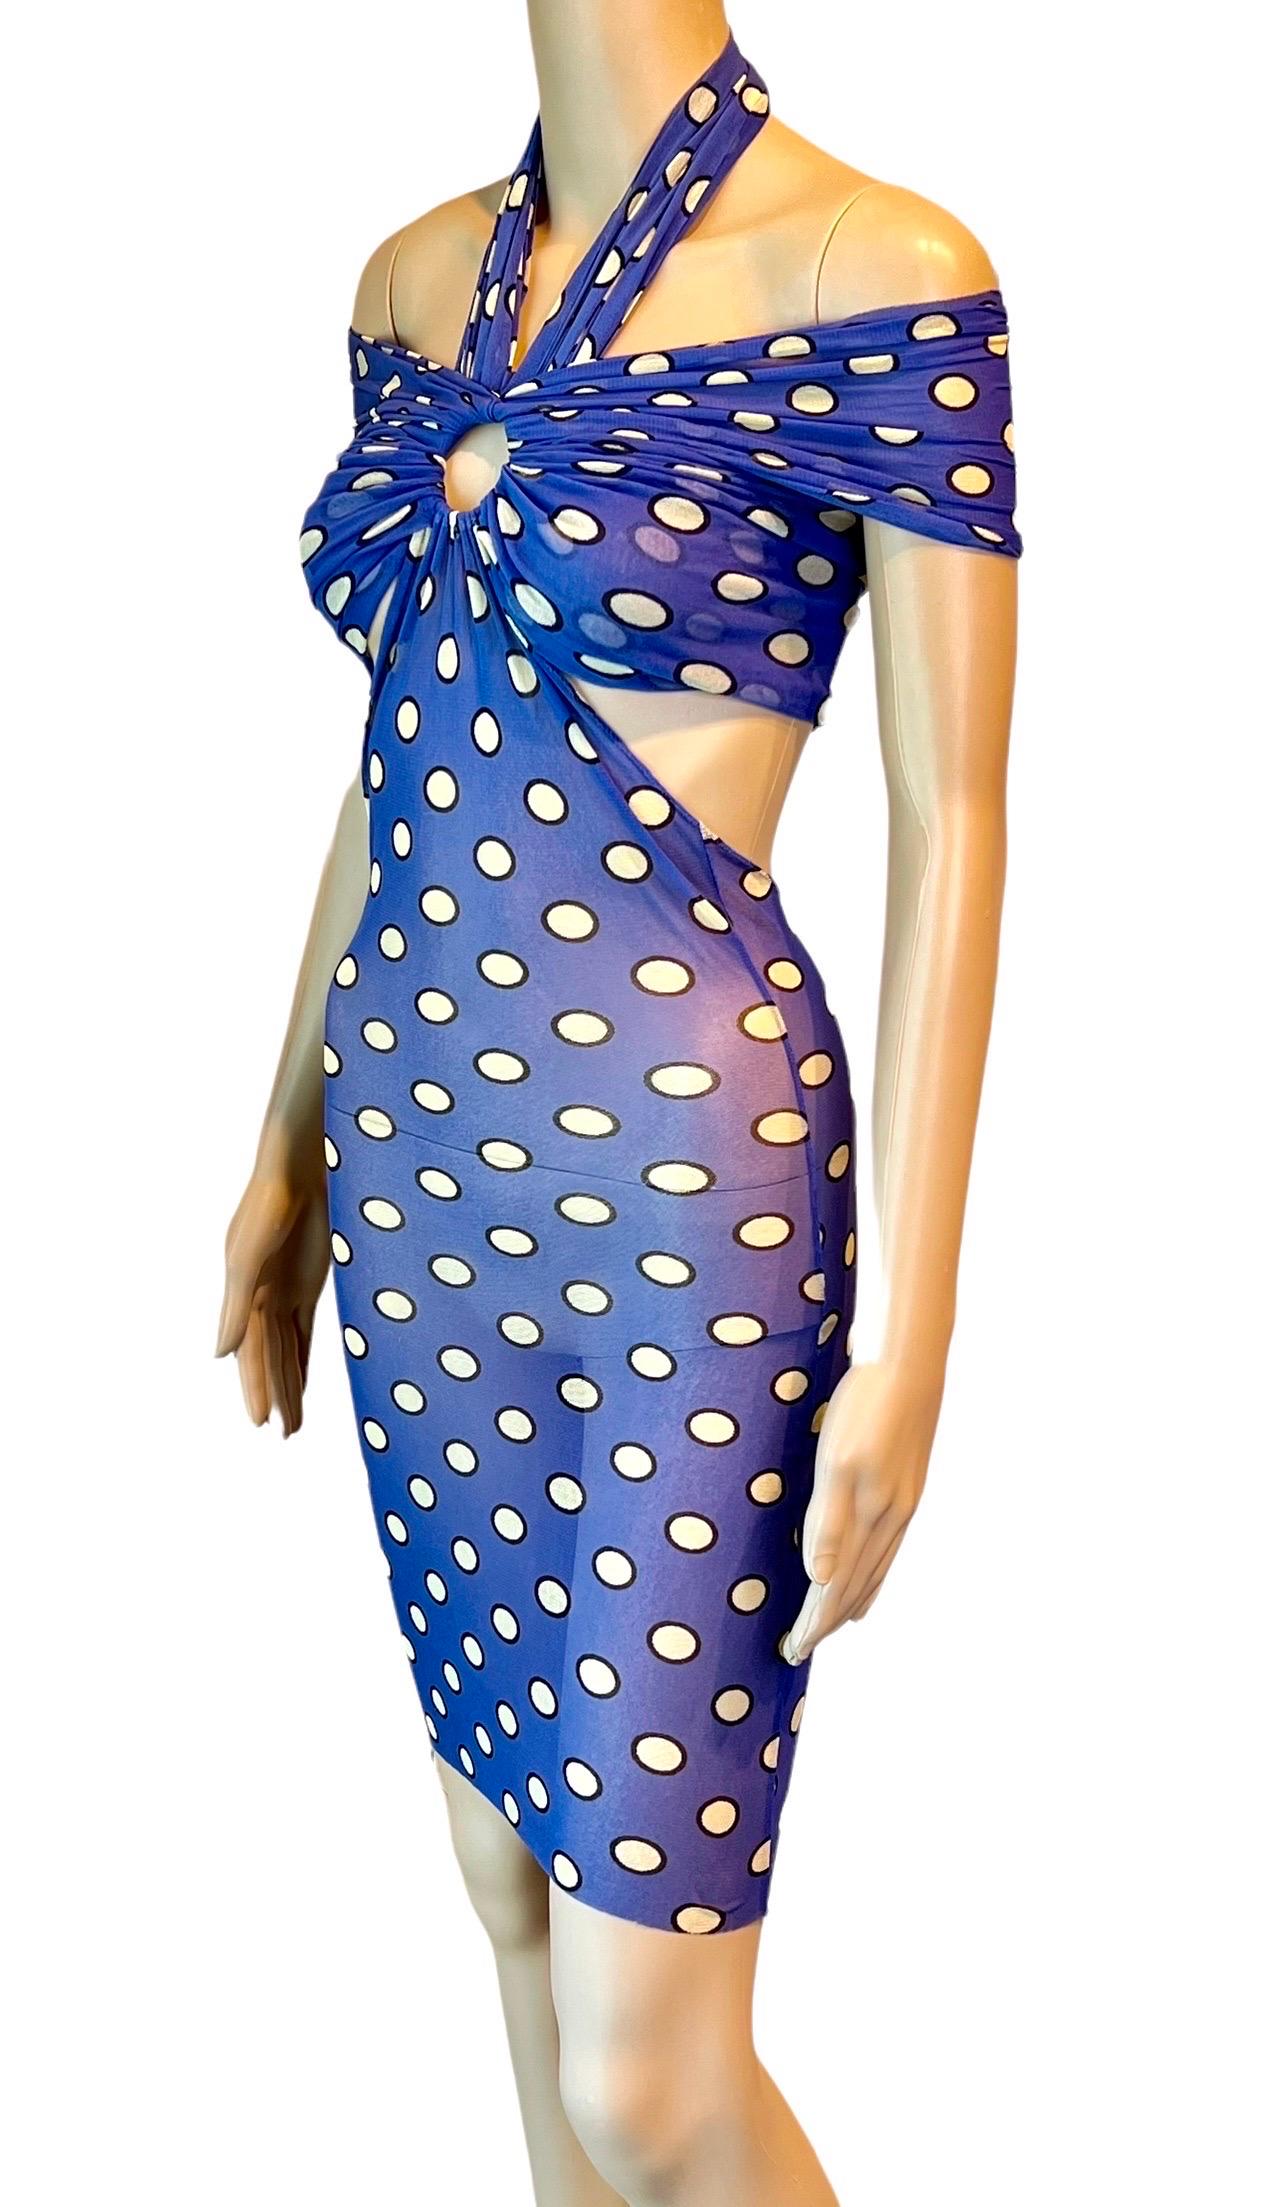 Jean Paul Gaultier Soleil S/S 1999 Cutout Polka Dot Mesh Bodycon Mini Dress 

Please note size tag has been removed.